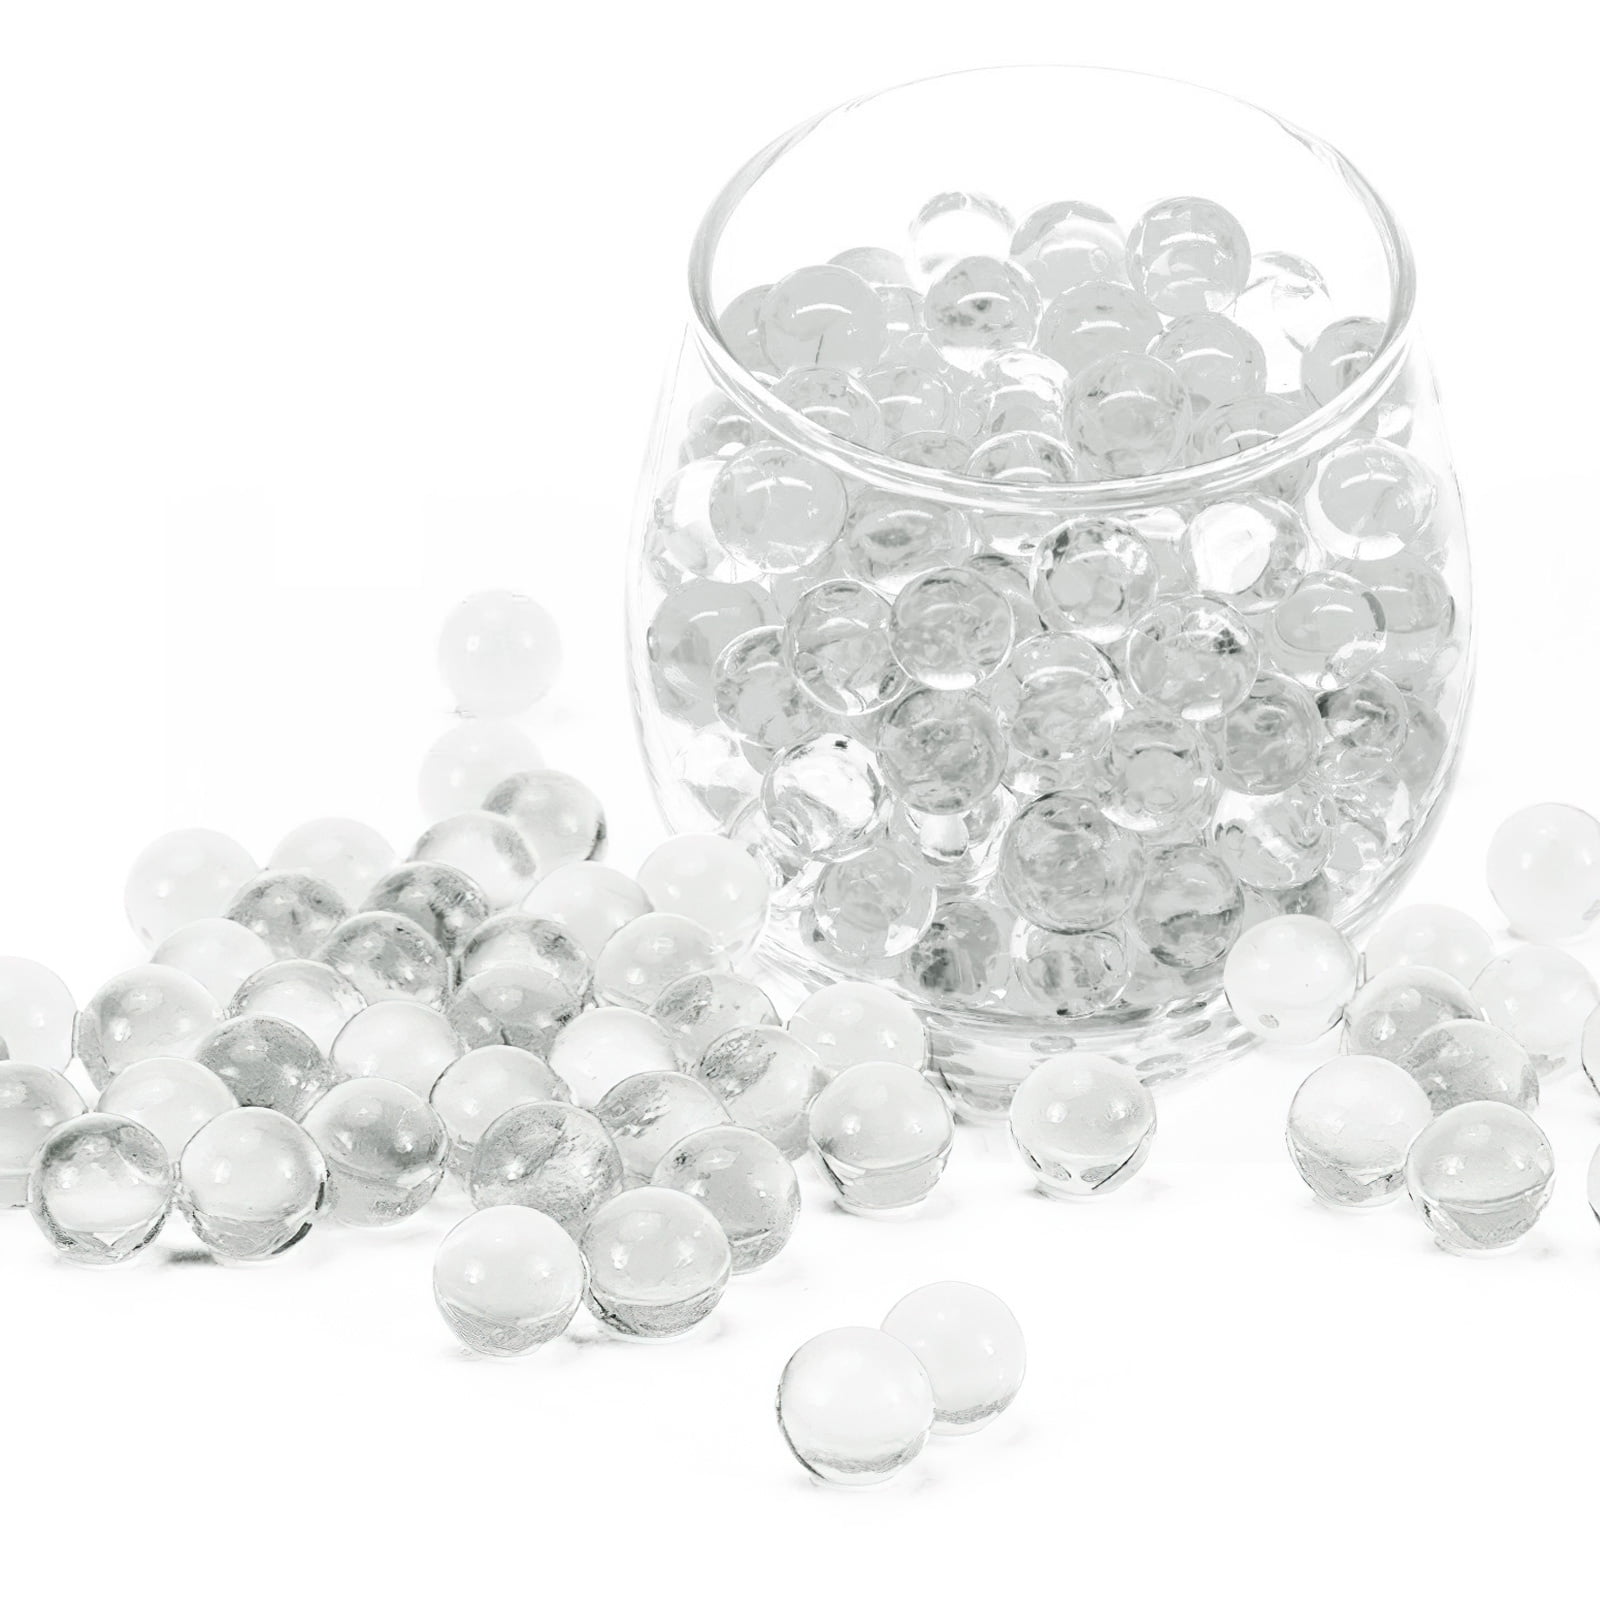 Clear Water Beads 100,000Pcs Clear Water Gel Jelly Balls Vase Filler  Beads,Vase Fillers for Floating Pearls, Floating Candle Making, Wedding